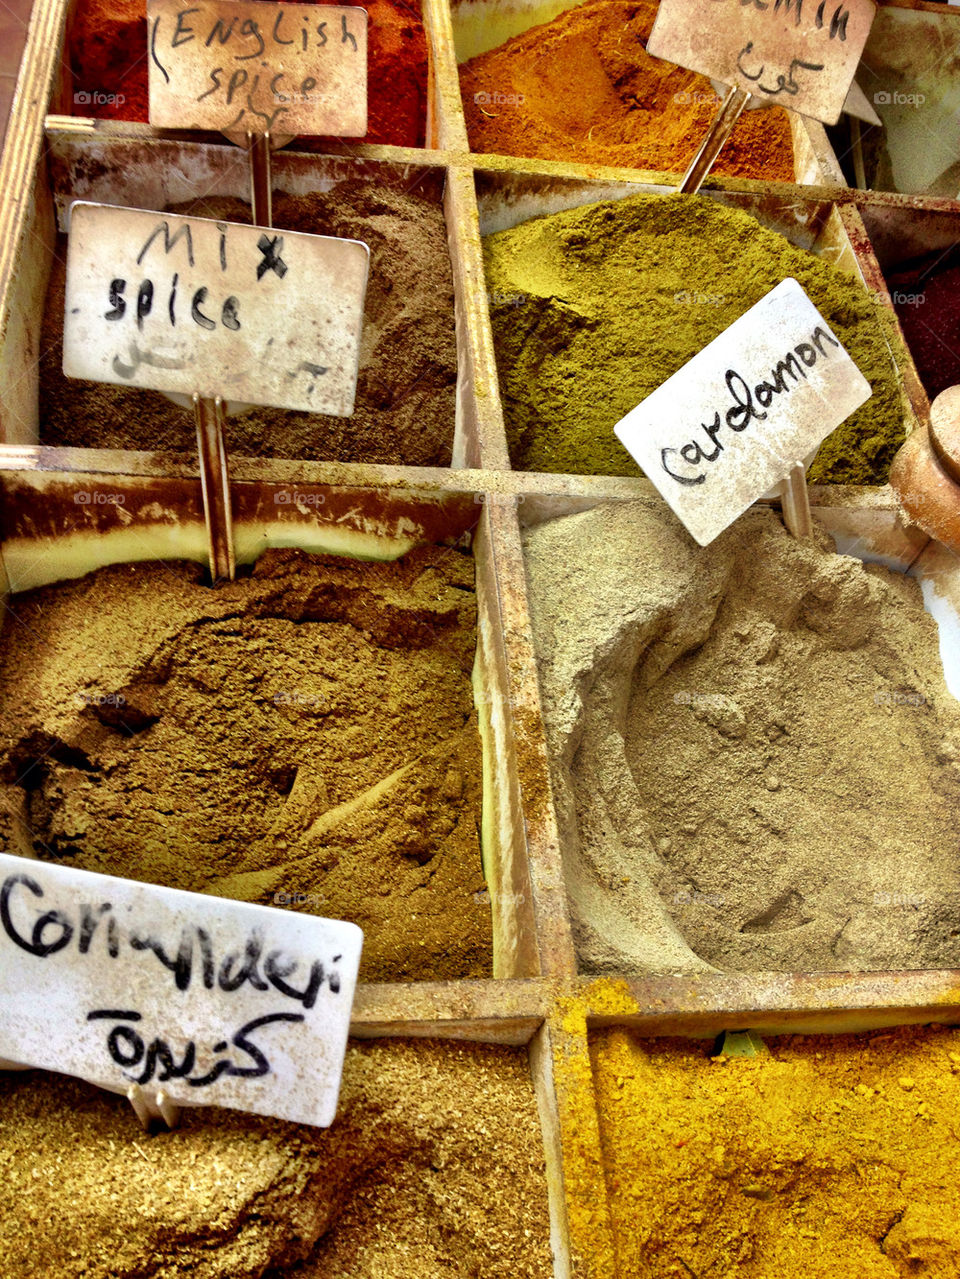 Elevated view of spices with label